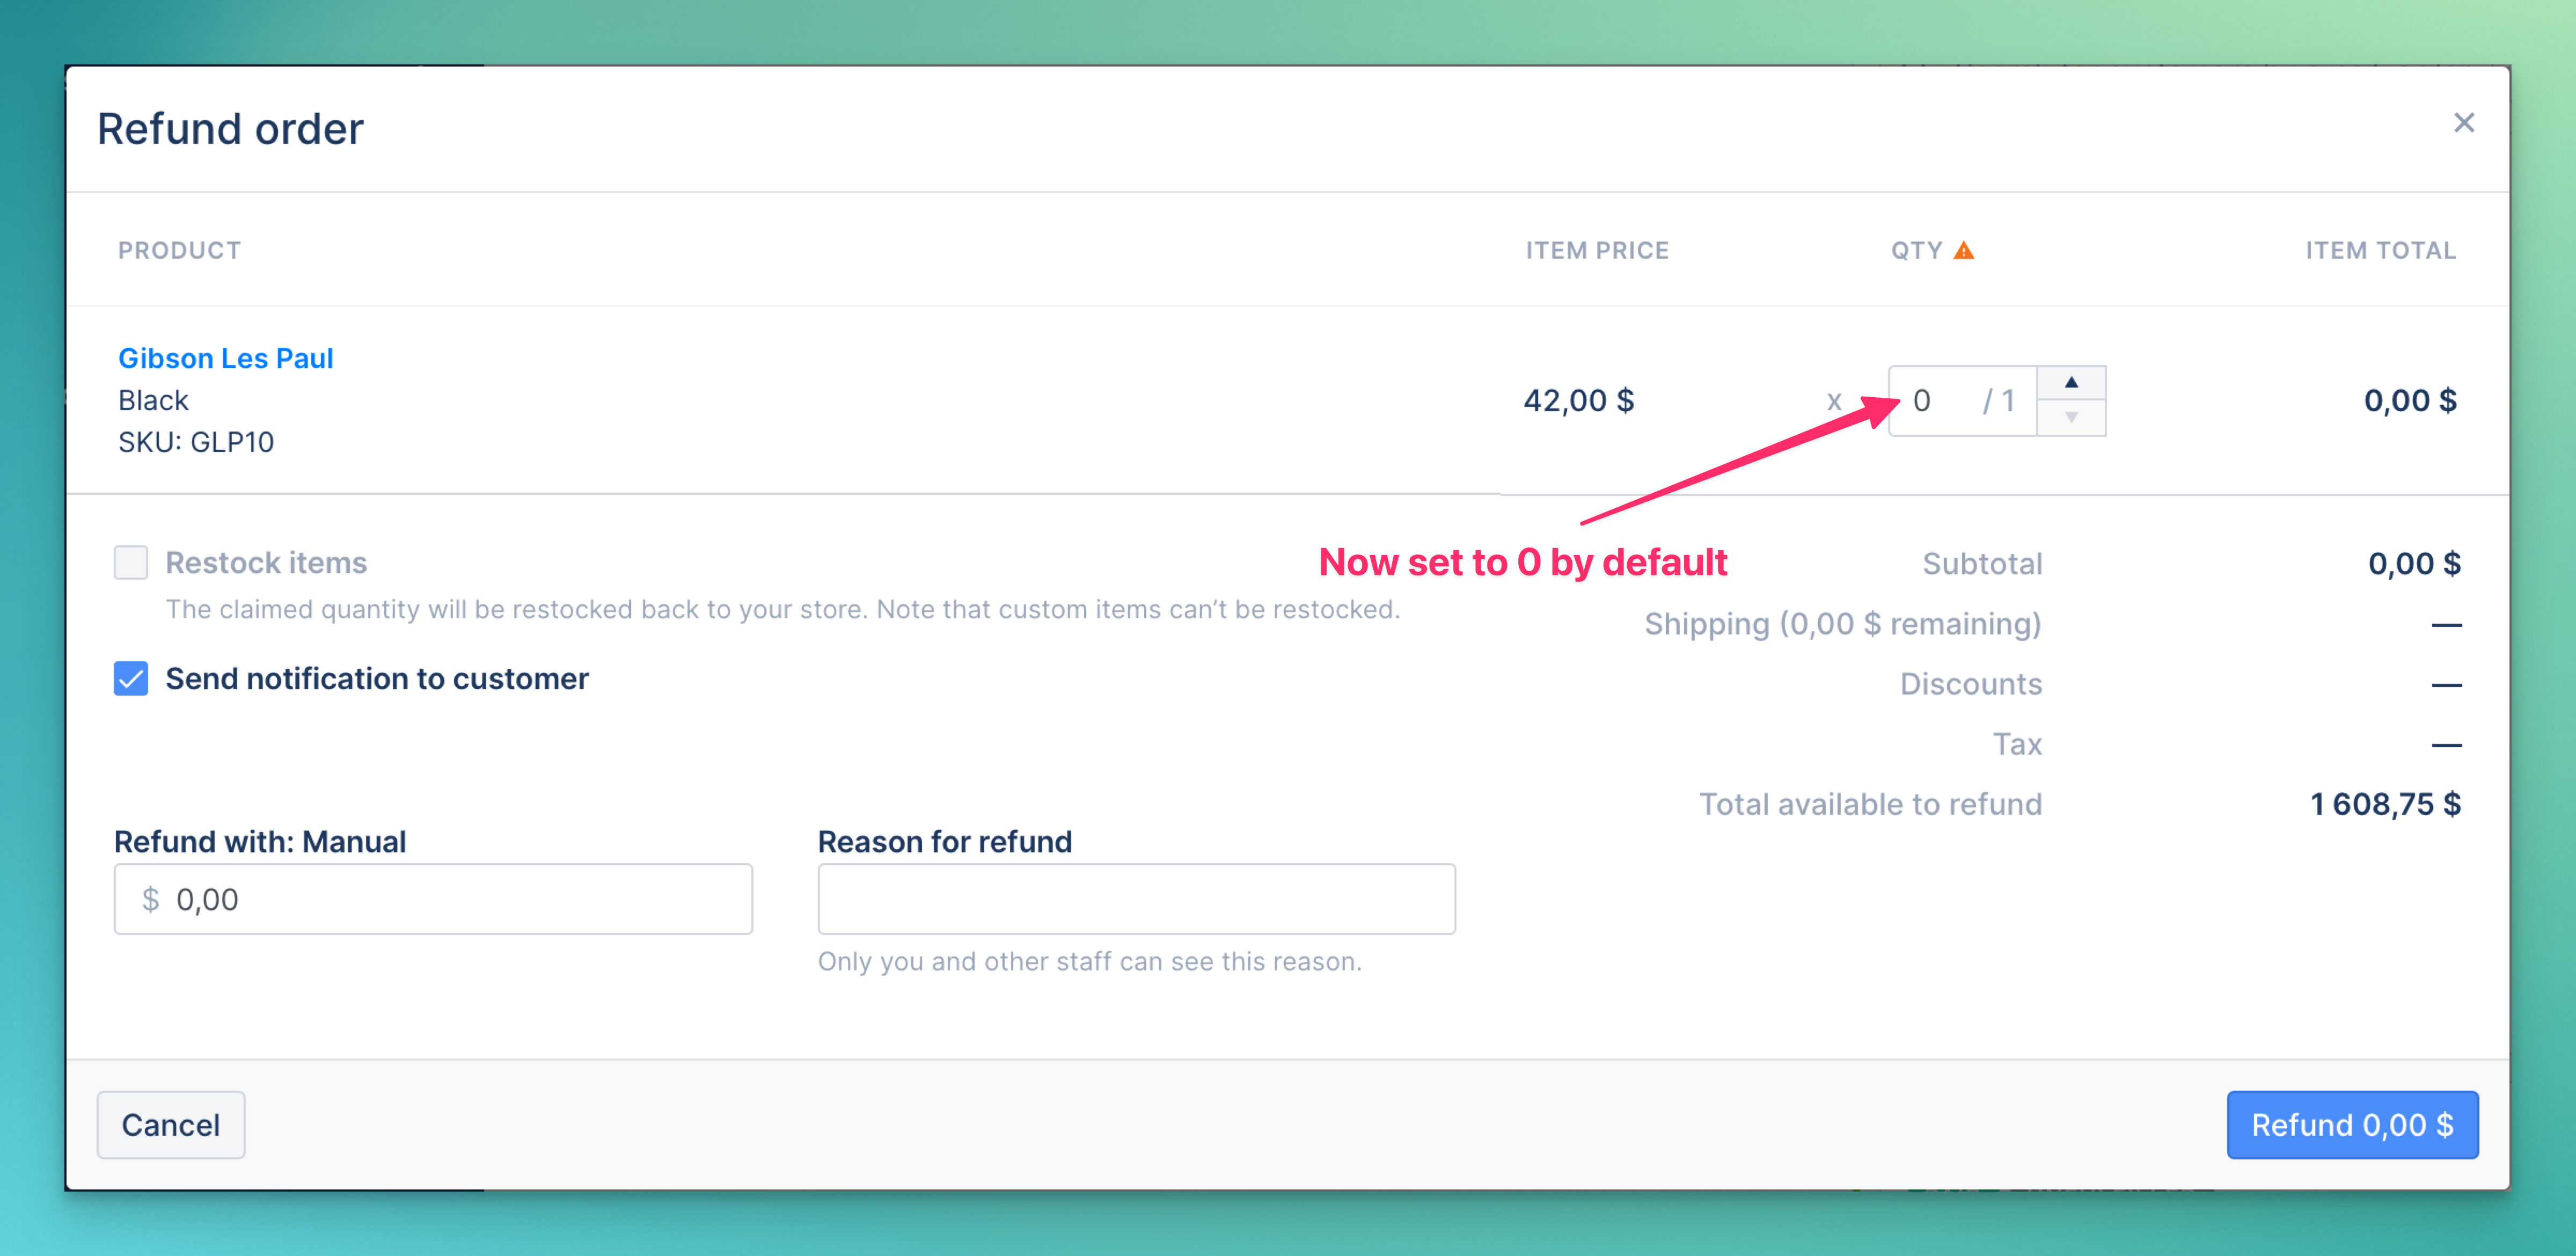 ЁЯТ╕ Shopify Refund: default quantity is now set to 0